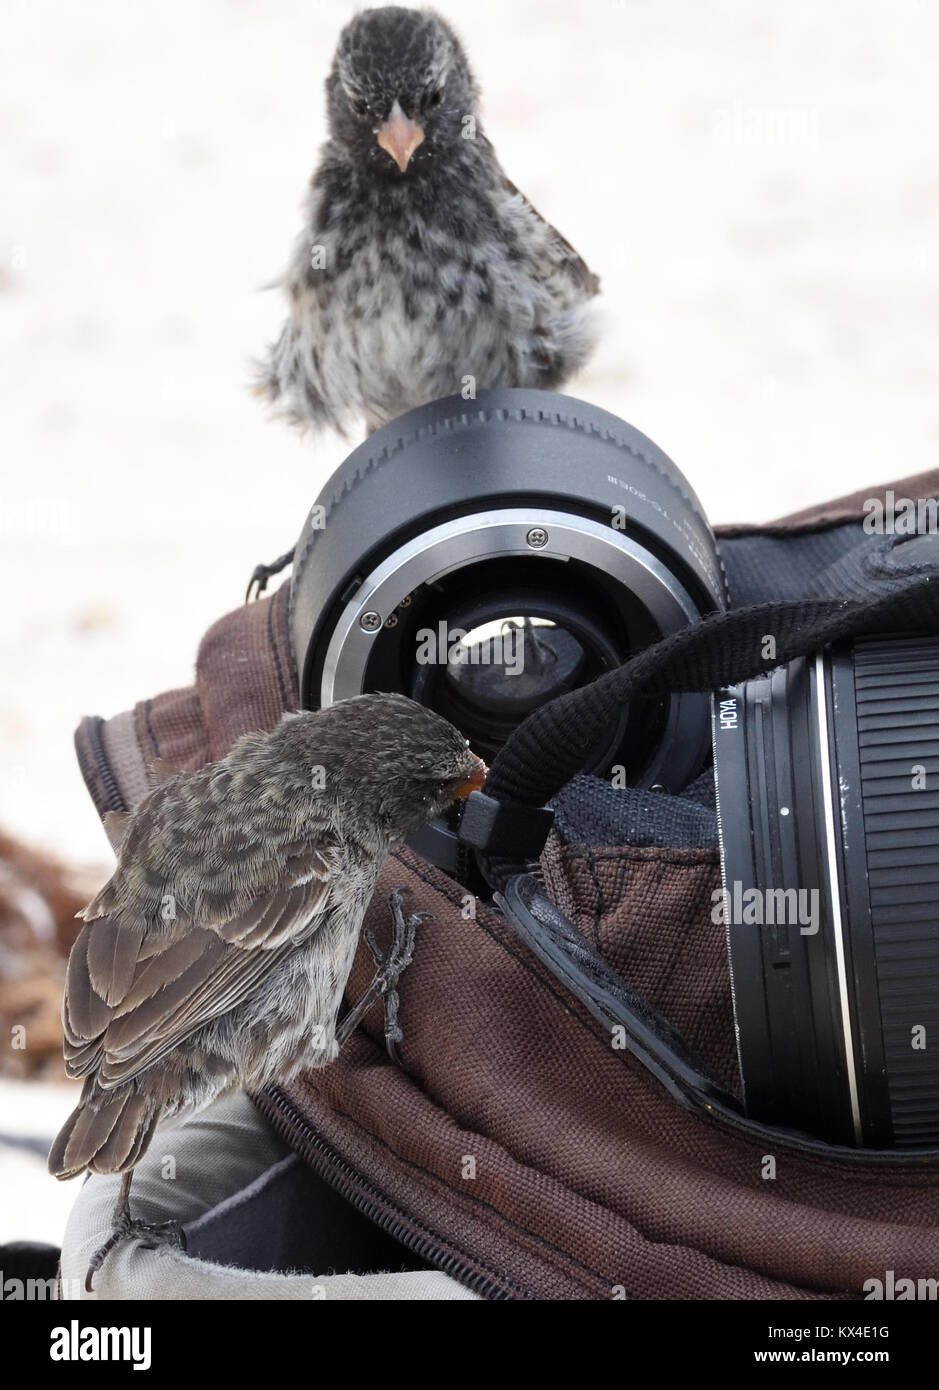 Female medium ground finches (Geospiza fortis) investigate a camera bag. This species is endemic to Galapagos. San Cristóbal, Galapagos, Ecuador. Stock Photo